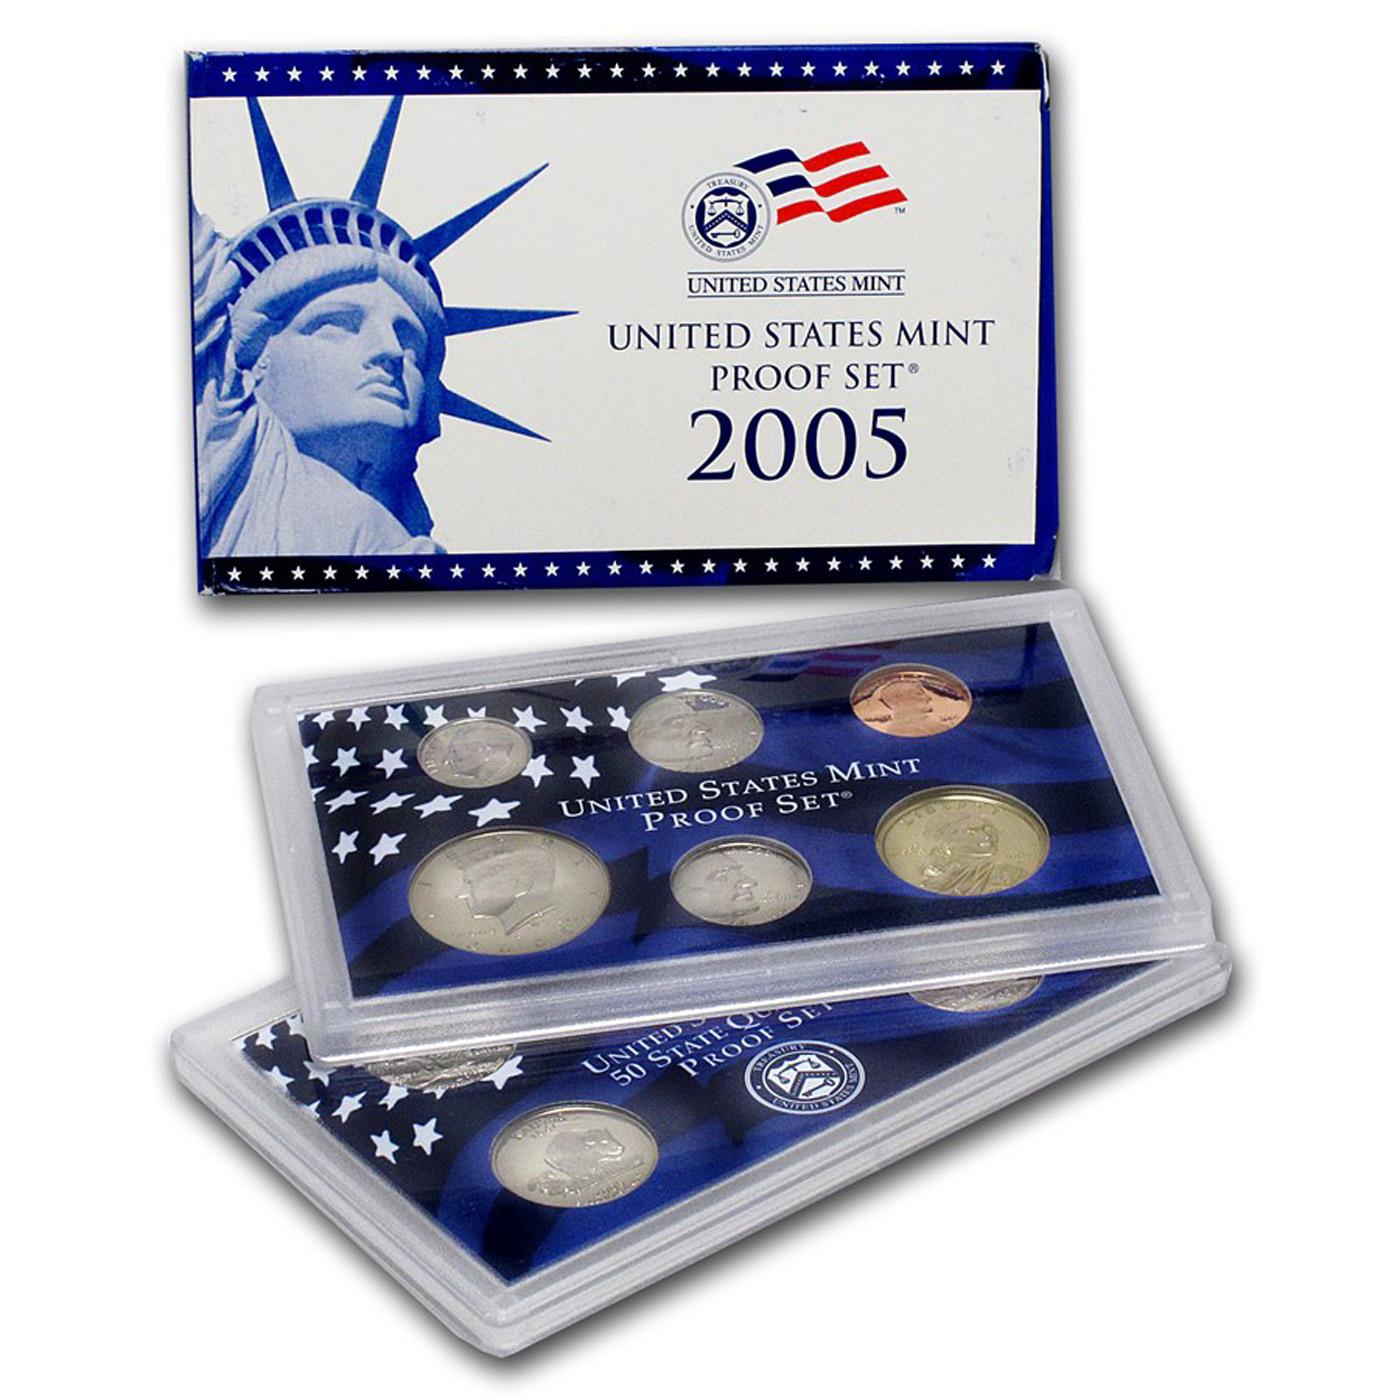 Group of 2 United States Mint Proof Sets 2004-2005 22 coins.